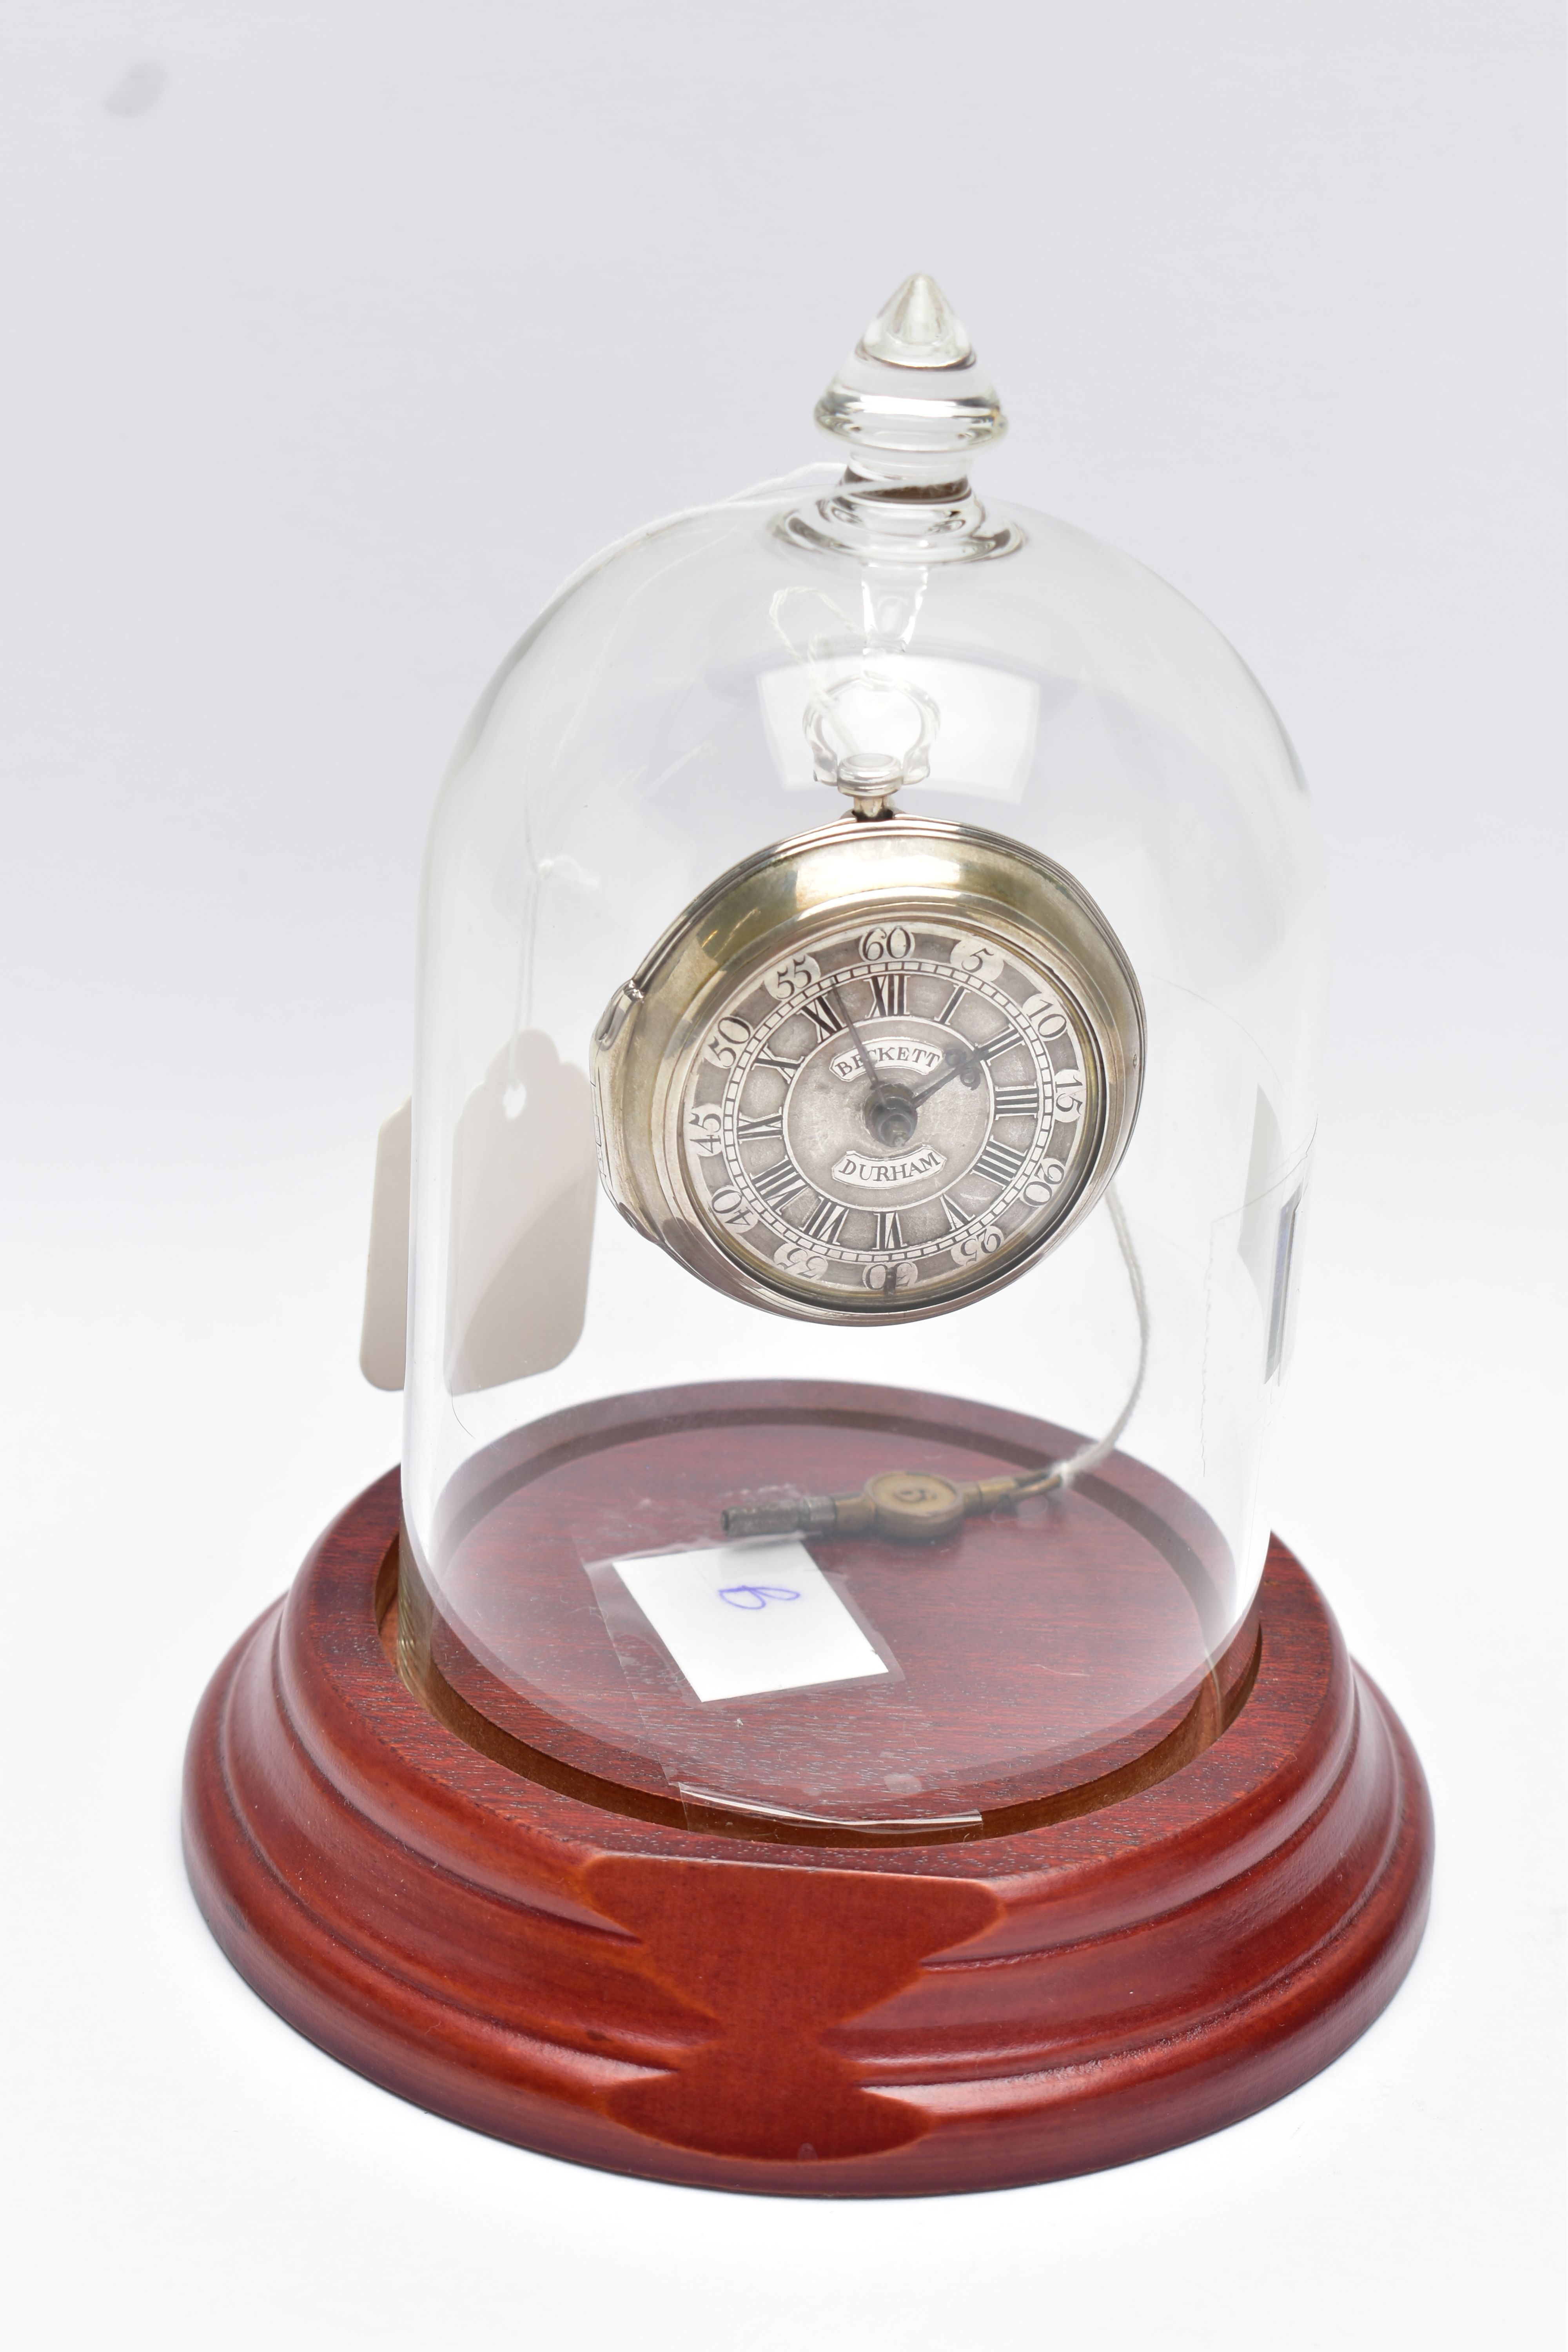 A GEORGE II SILVER PAIR CASED VERGE POCKET WATCH BY 'THOMAS BECKETT', key wound, round champleve - Image 11 of 11